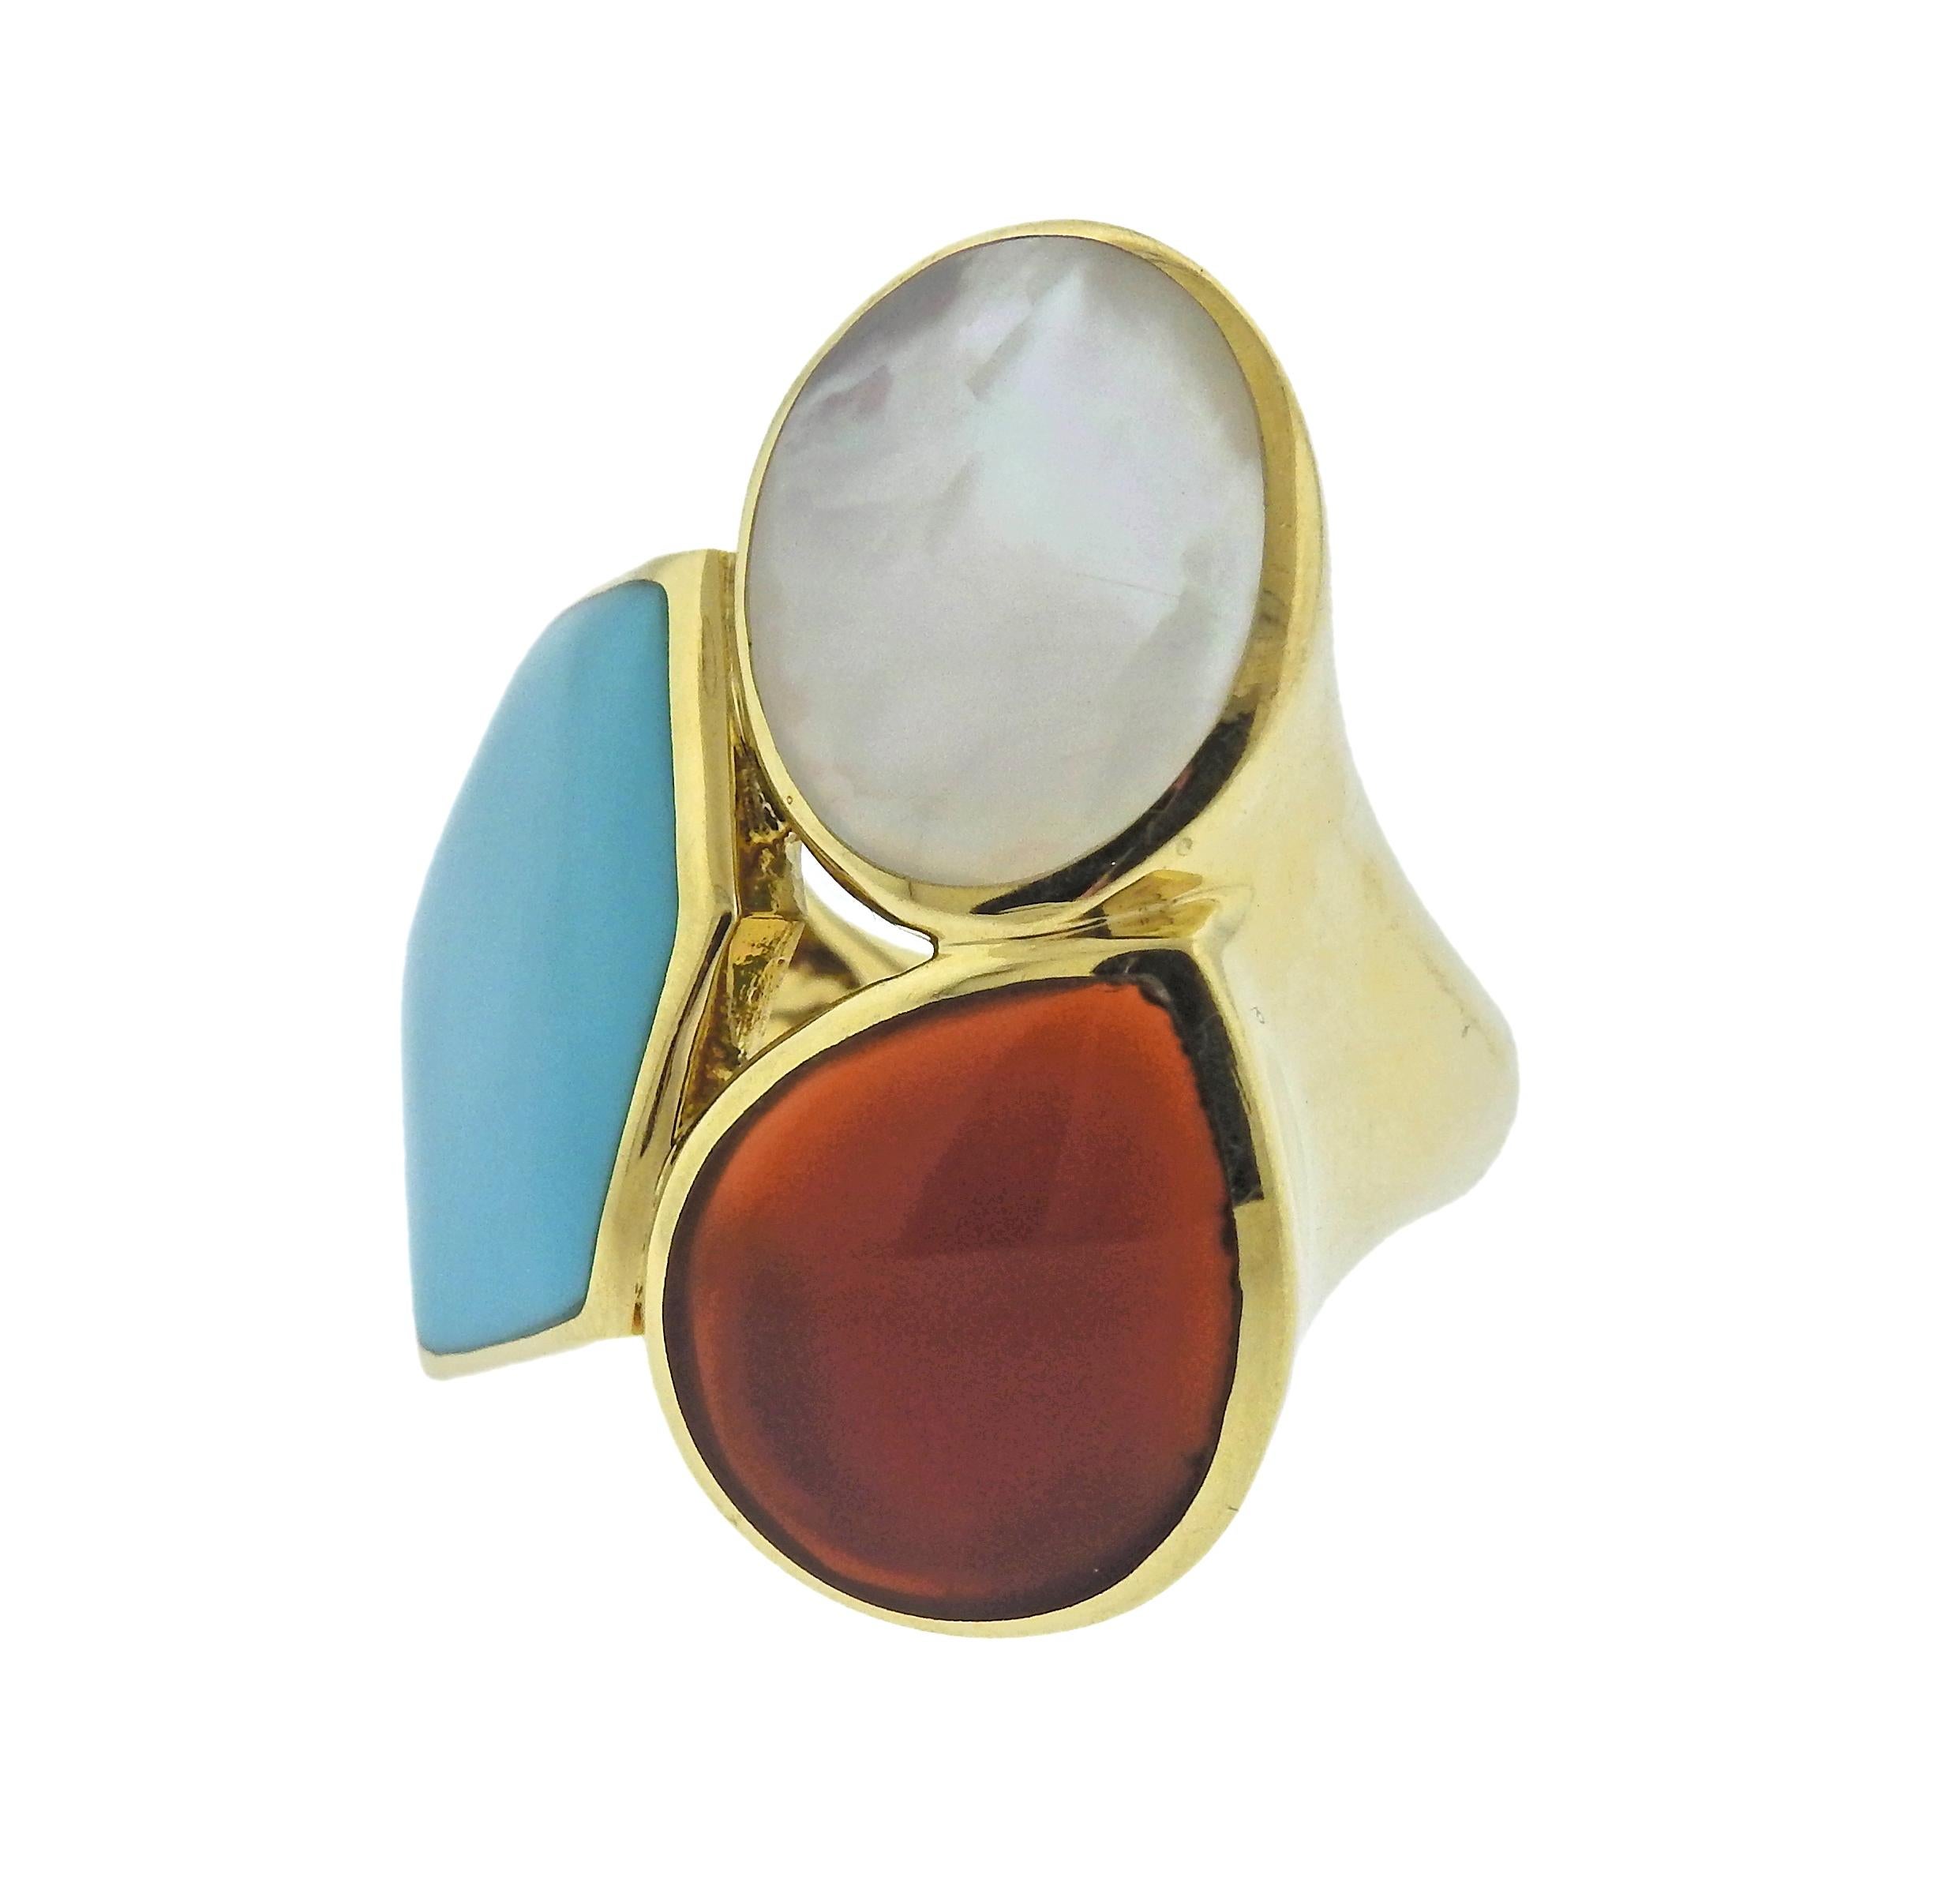 18k gold multi gemstone ring by Ippolita, set with turquoise, carnelian and mother of pearl. Ring size 7 1/4, ring top - 33mm x 32mm, weighs 20.1 grams. Marked Ippolita and 18k. Retail $3995. Come with Pouch.